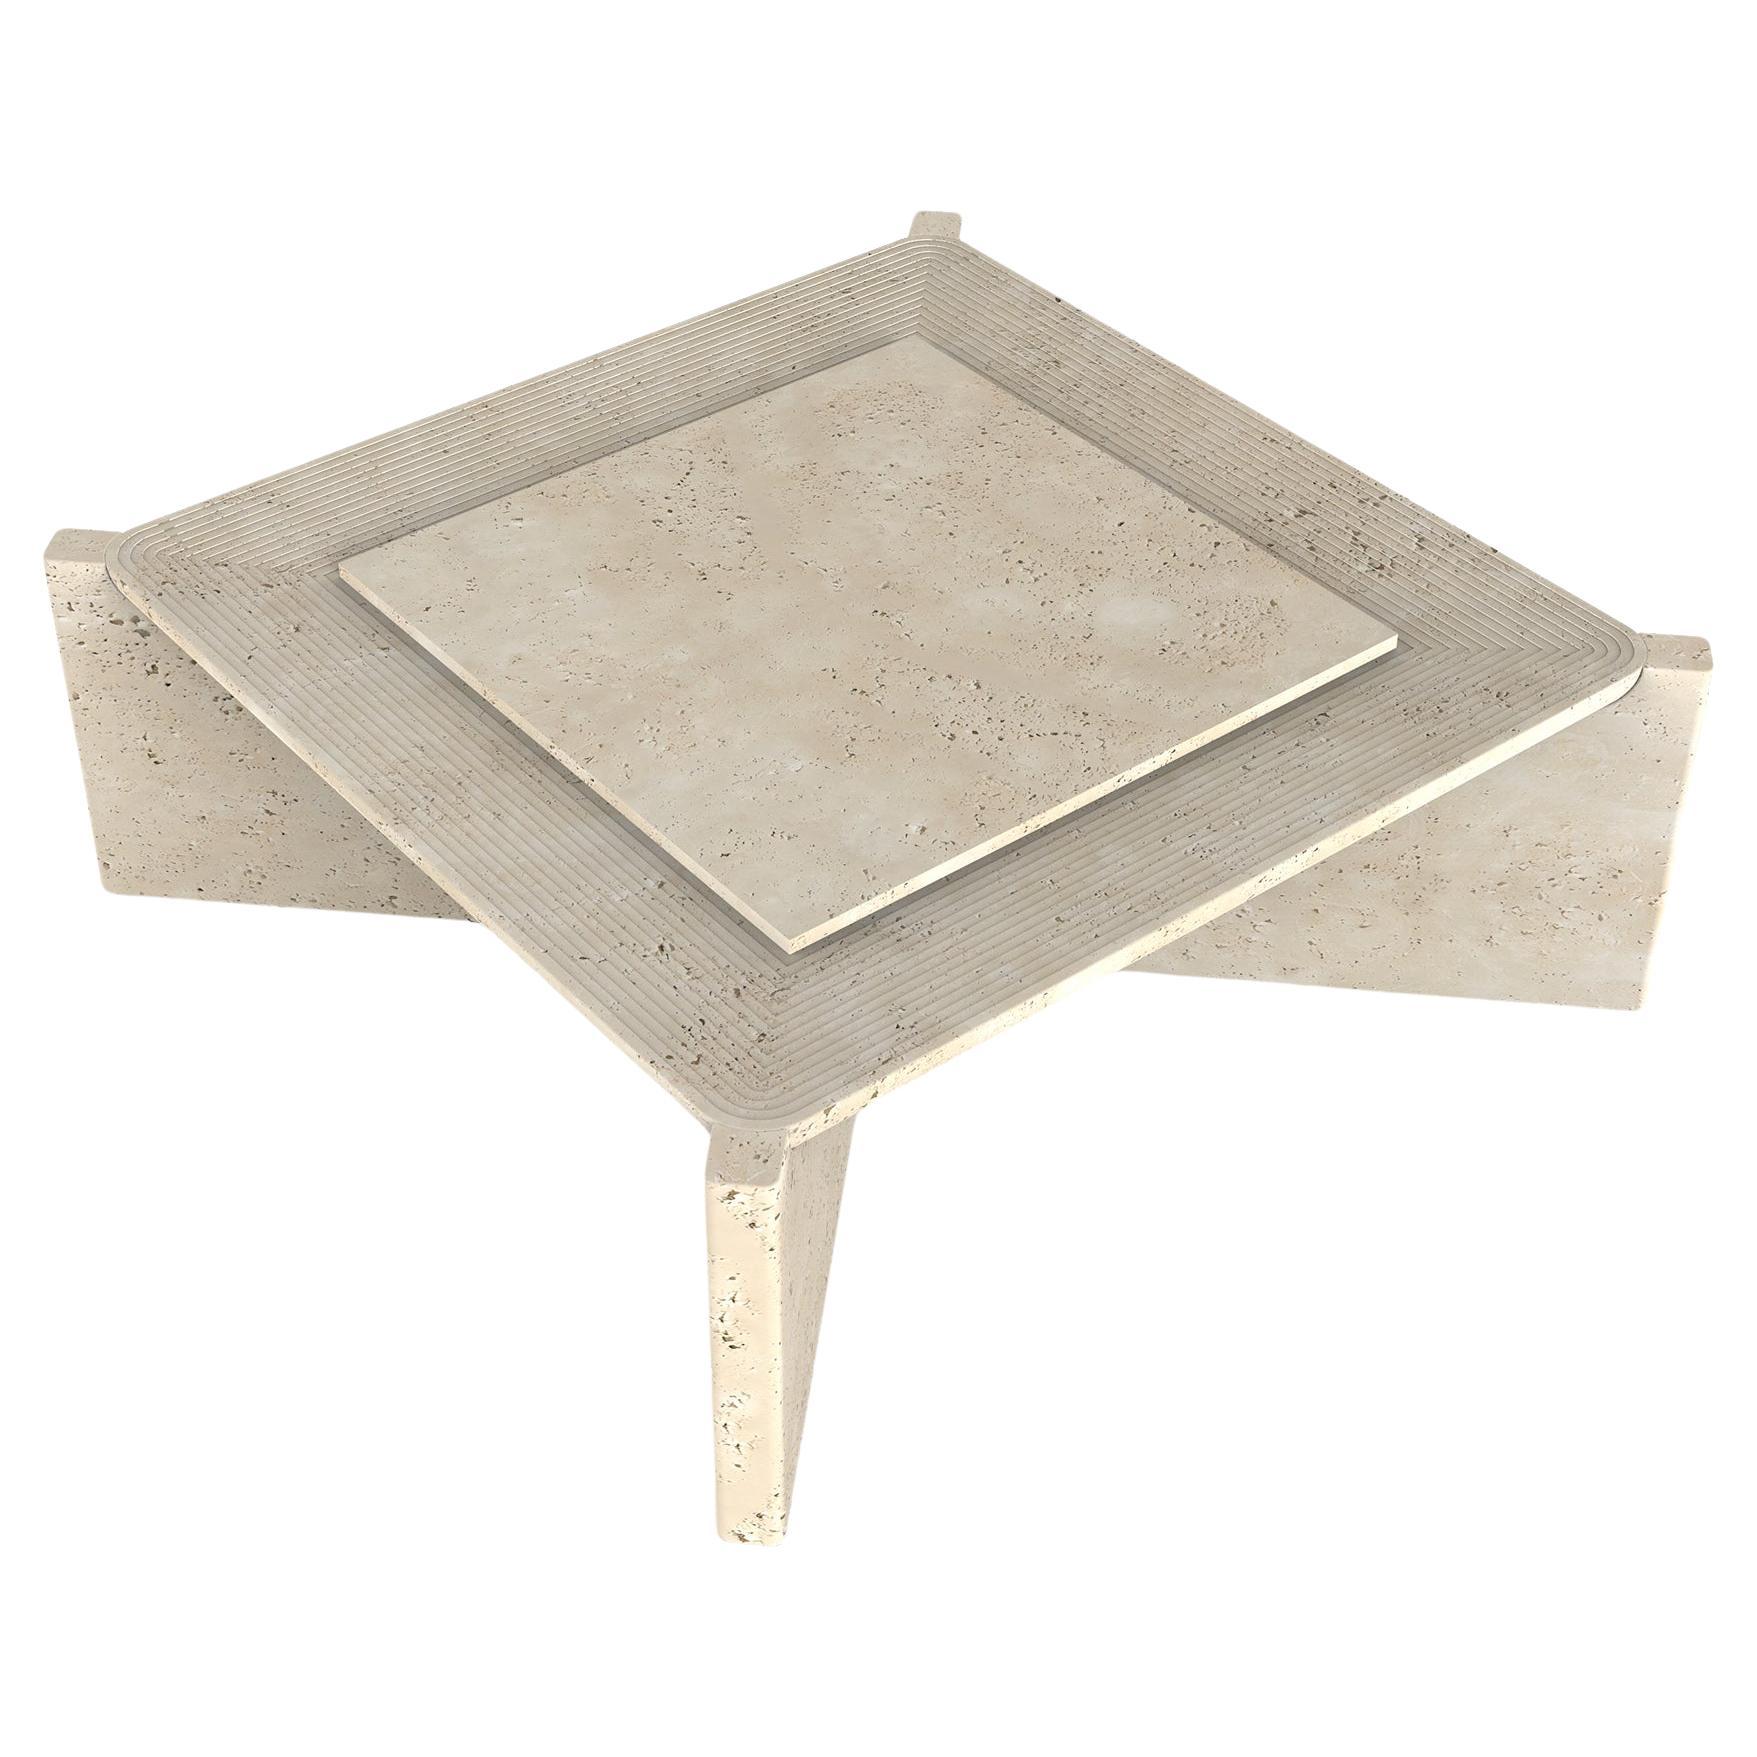 Arkhe No 2 Coffee Table Square Travertine, Modern Sculptural by Fulden Topaloglu For Sale